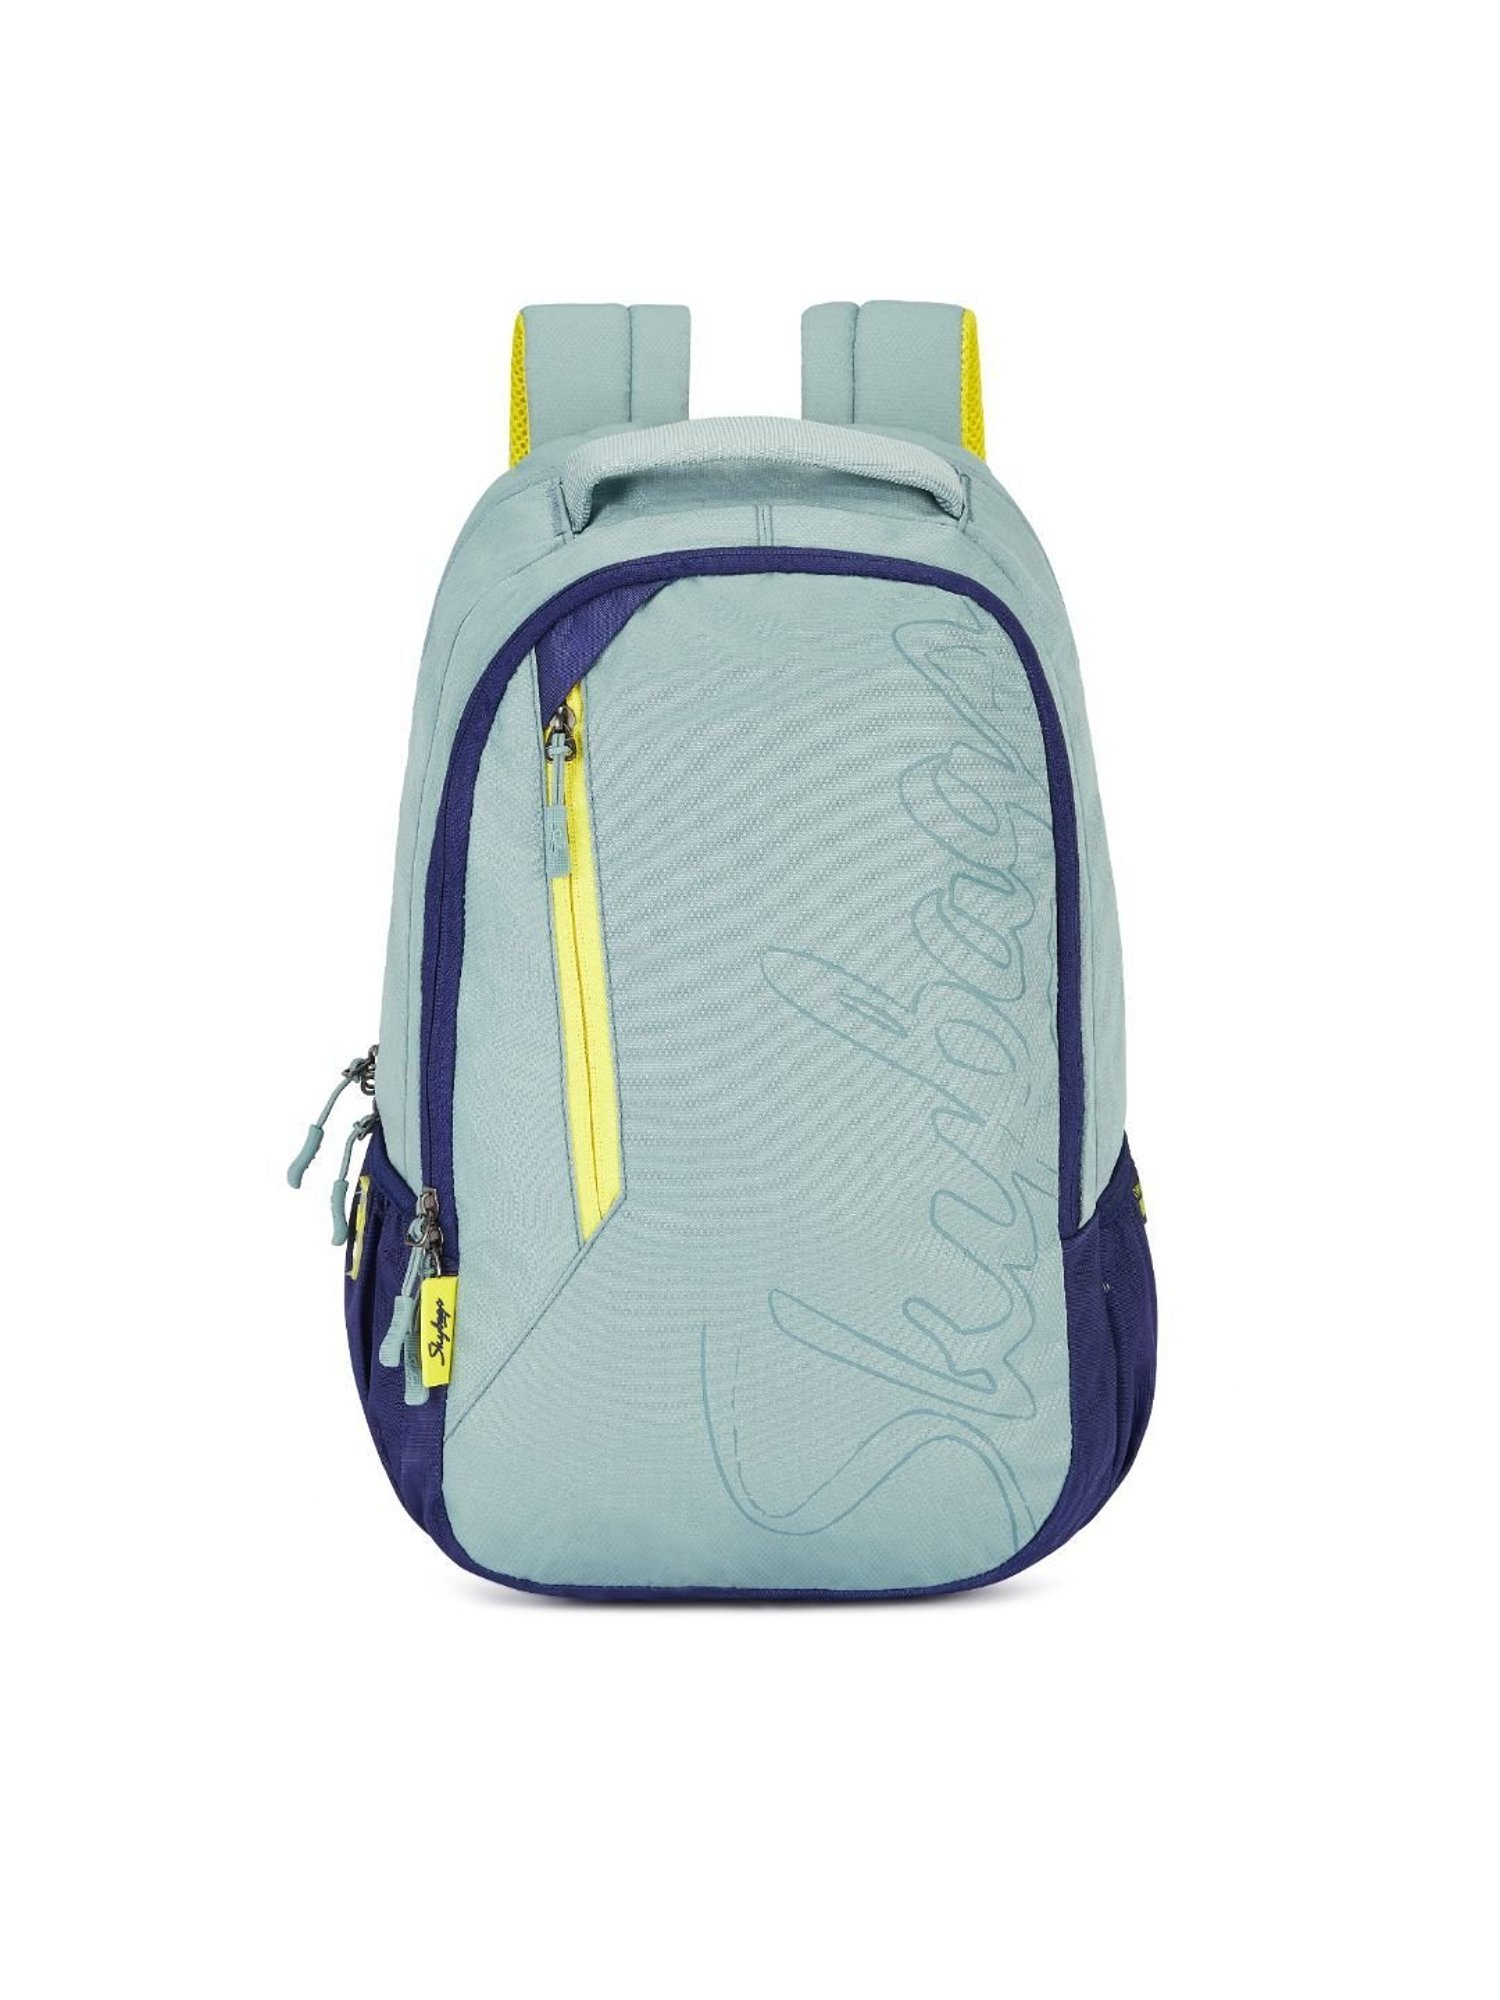 Buy Skybags Polyester Solid Hawk 01 Rucksack 45L Blue at Amazon.in